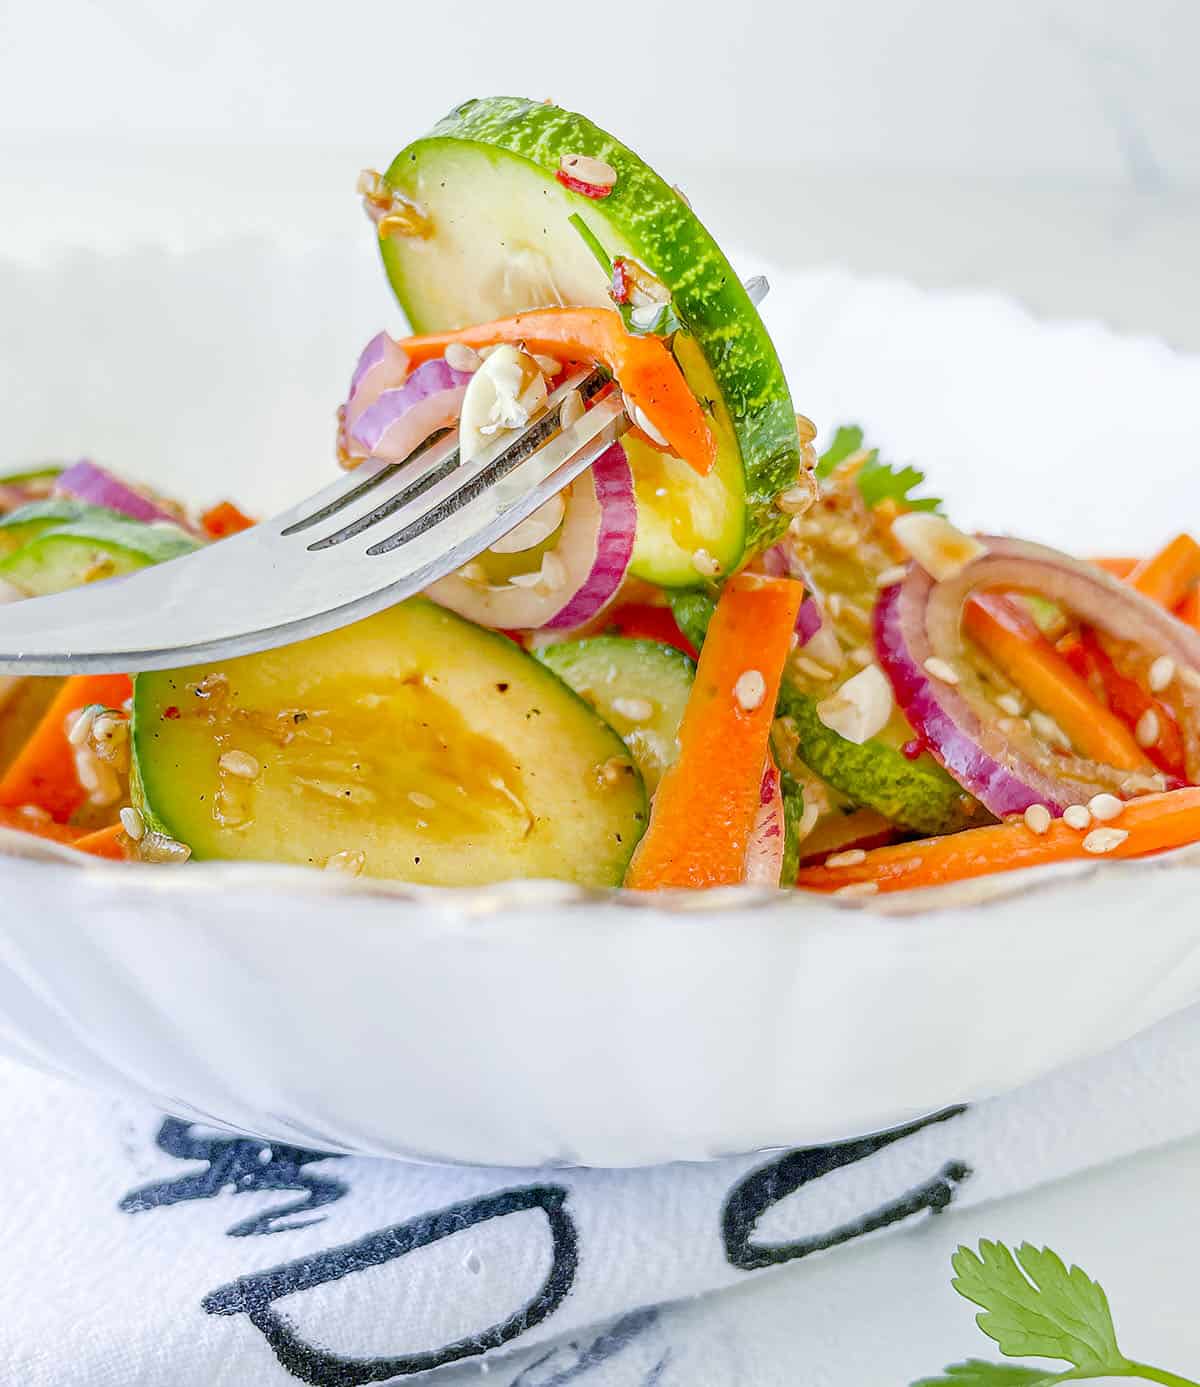 A forkful of the cucumber carrot salad.